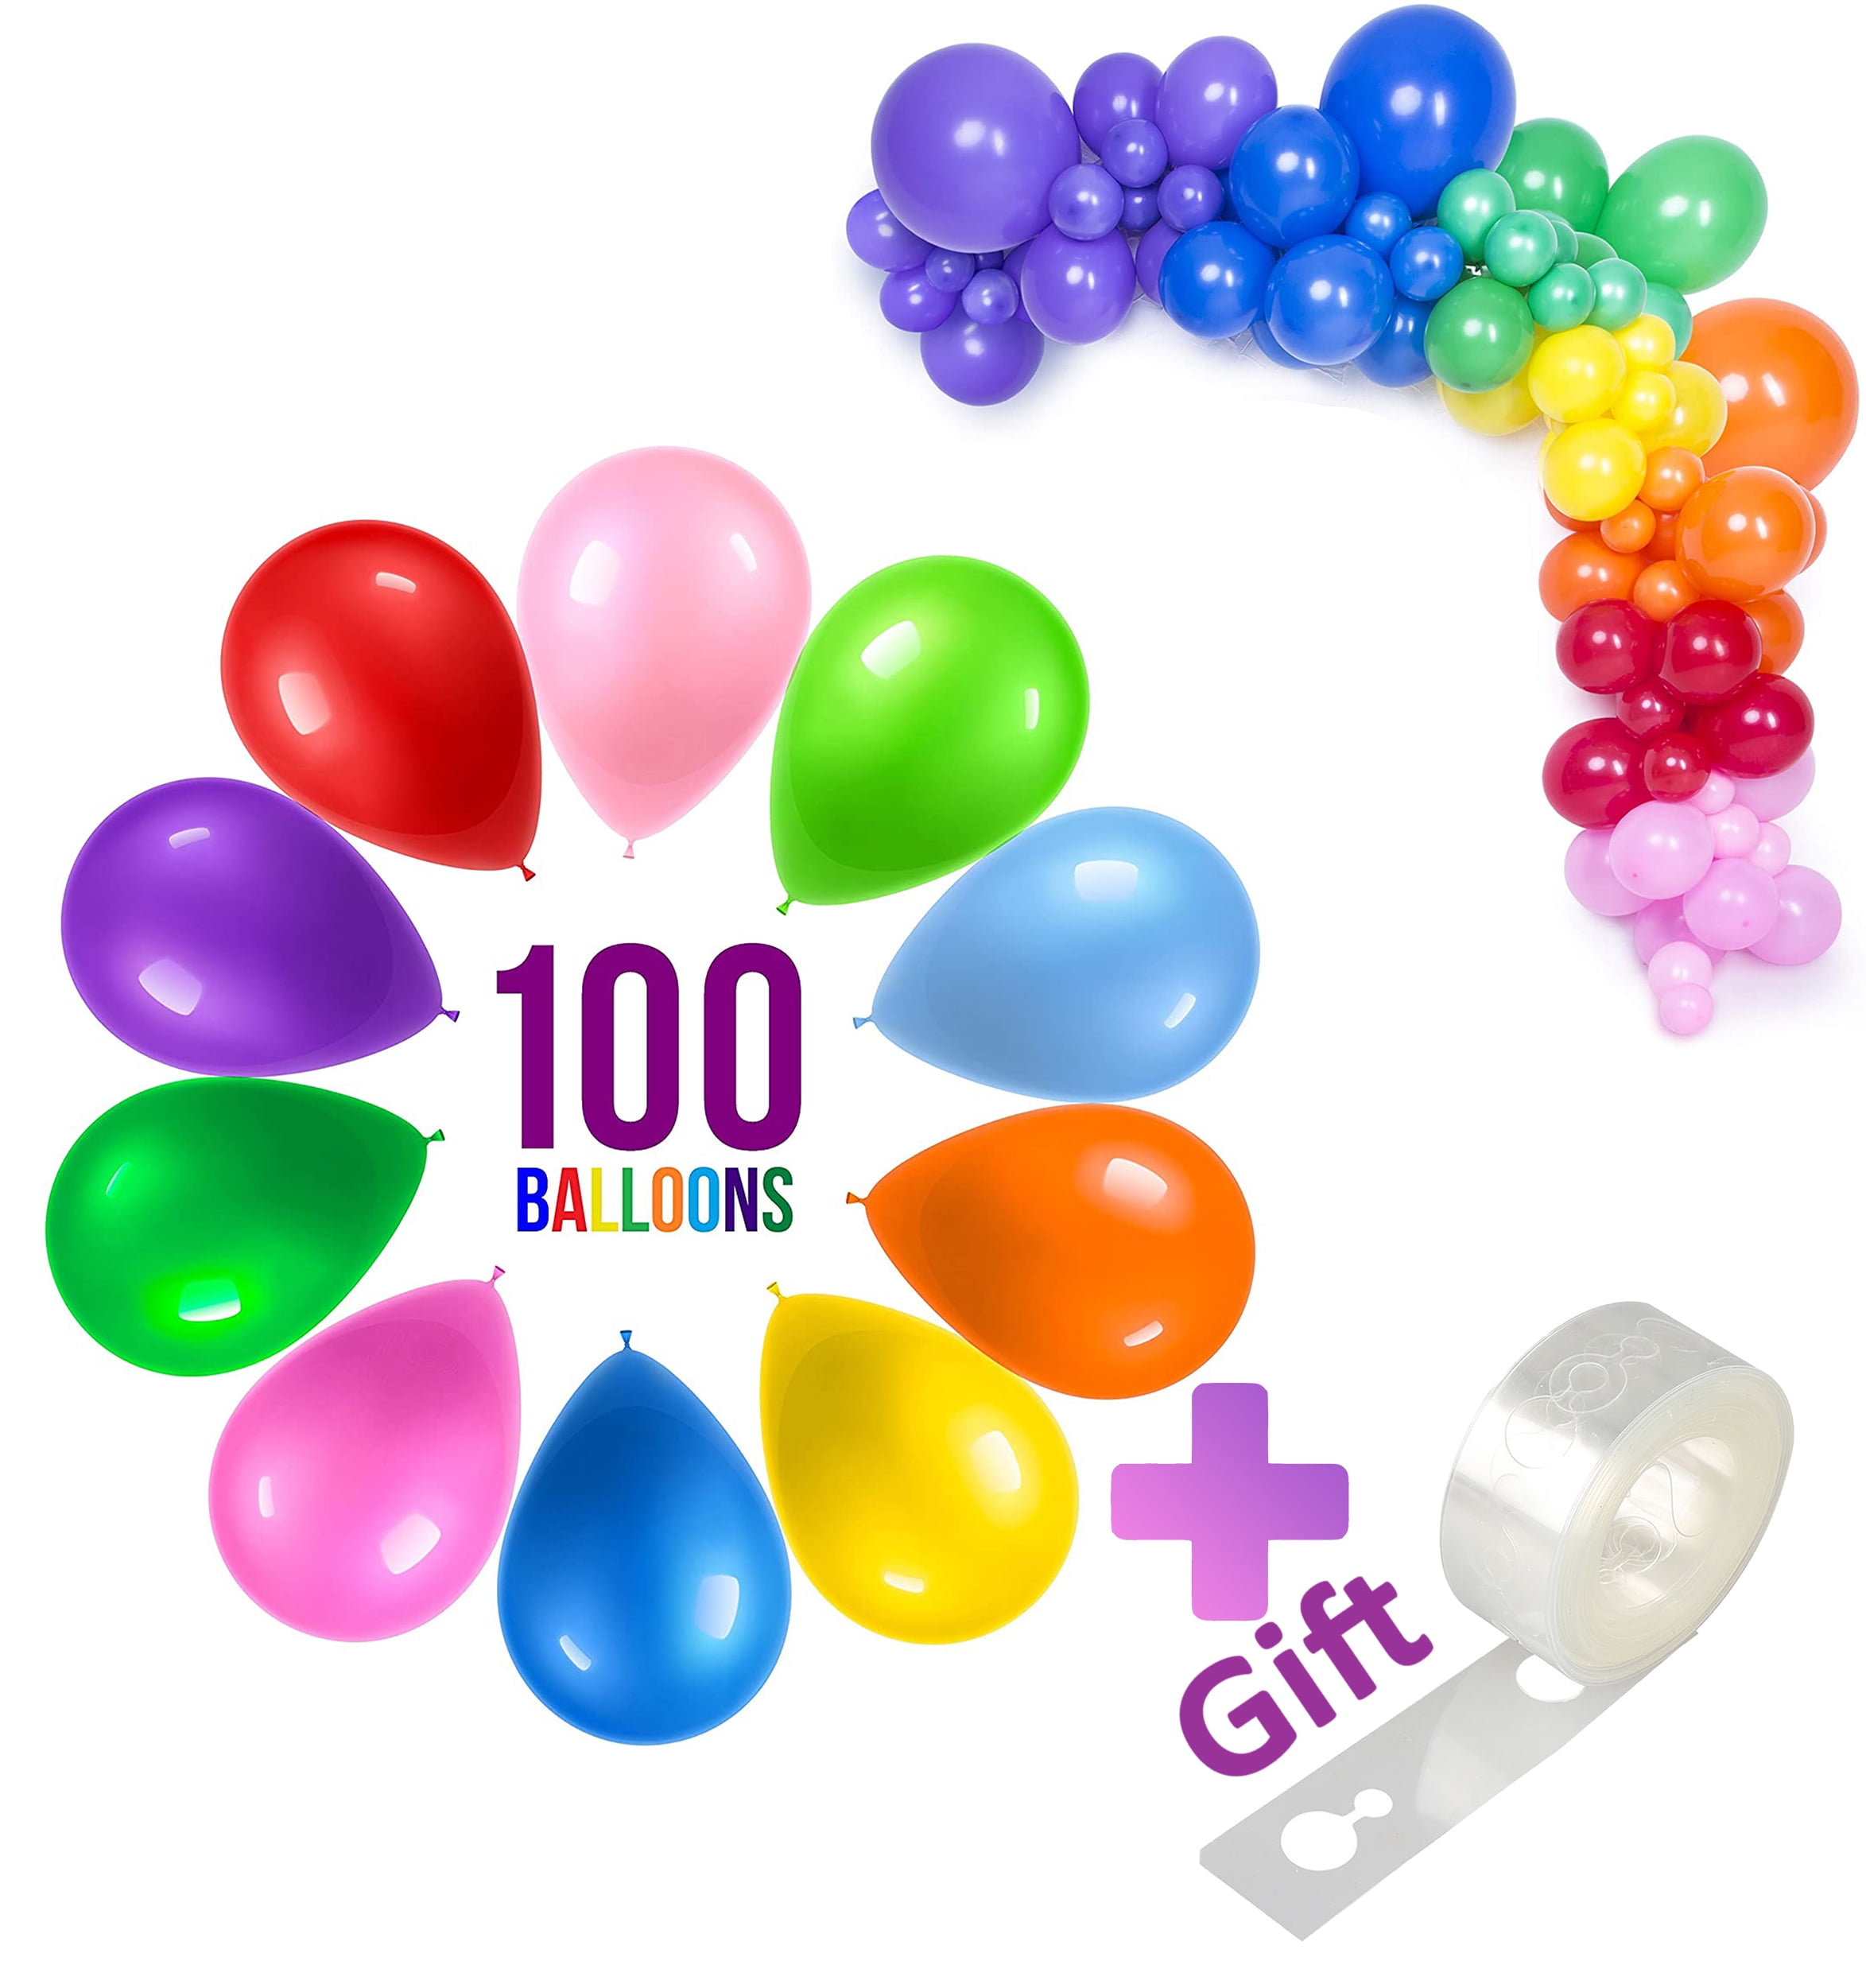 10x  Face Expression Latex Colorful Balloons Birthday Party Wedding Decor MC 